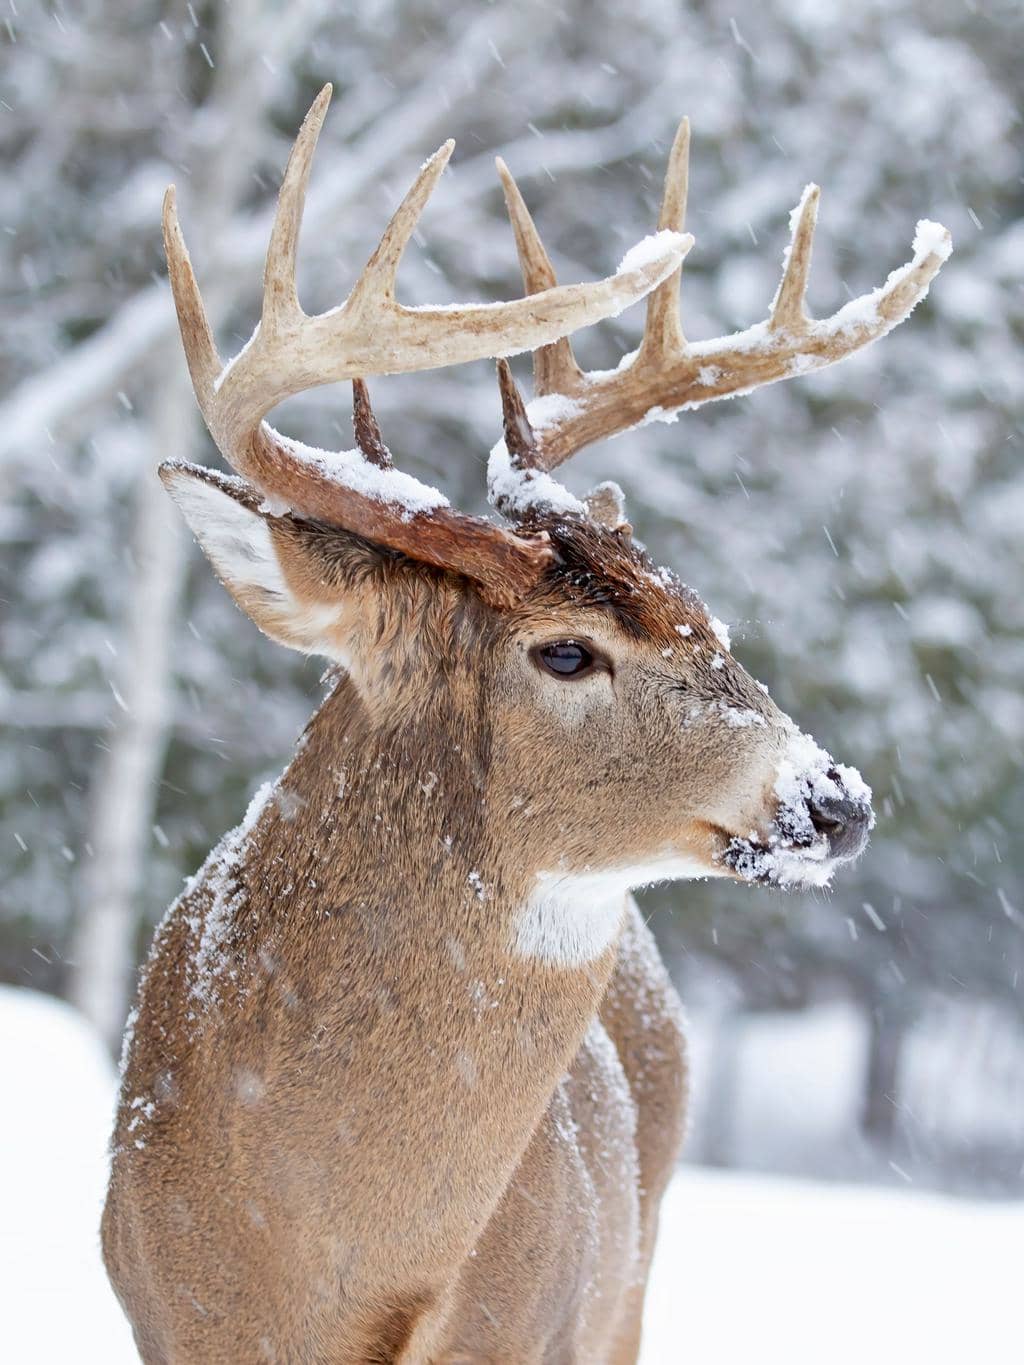 6 Places Deer Go During The Winter (And When They Return)